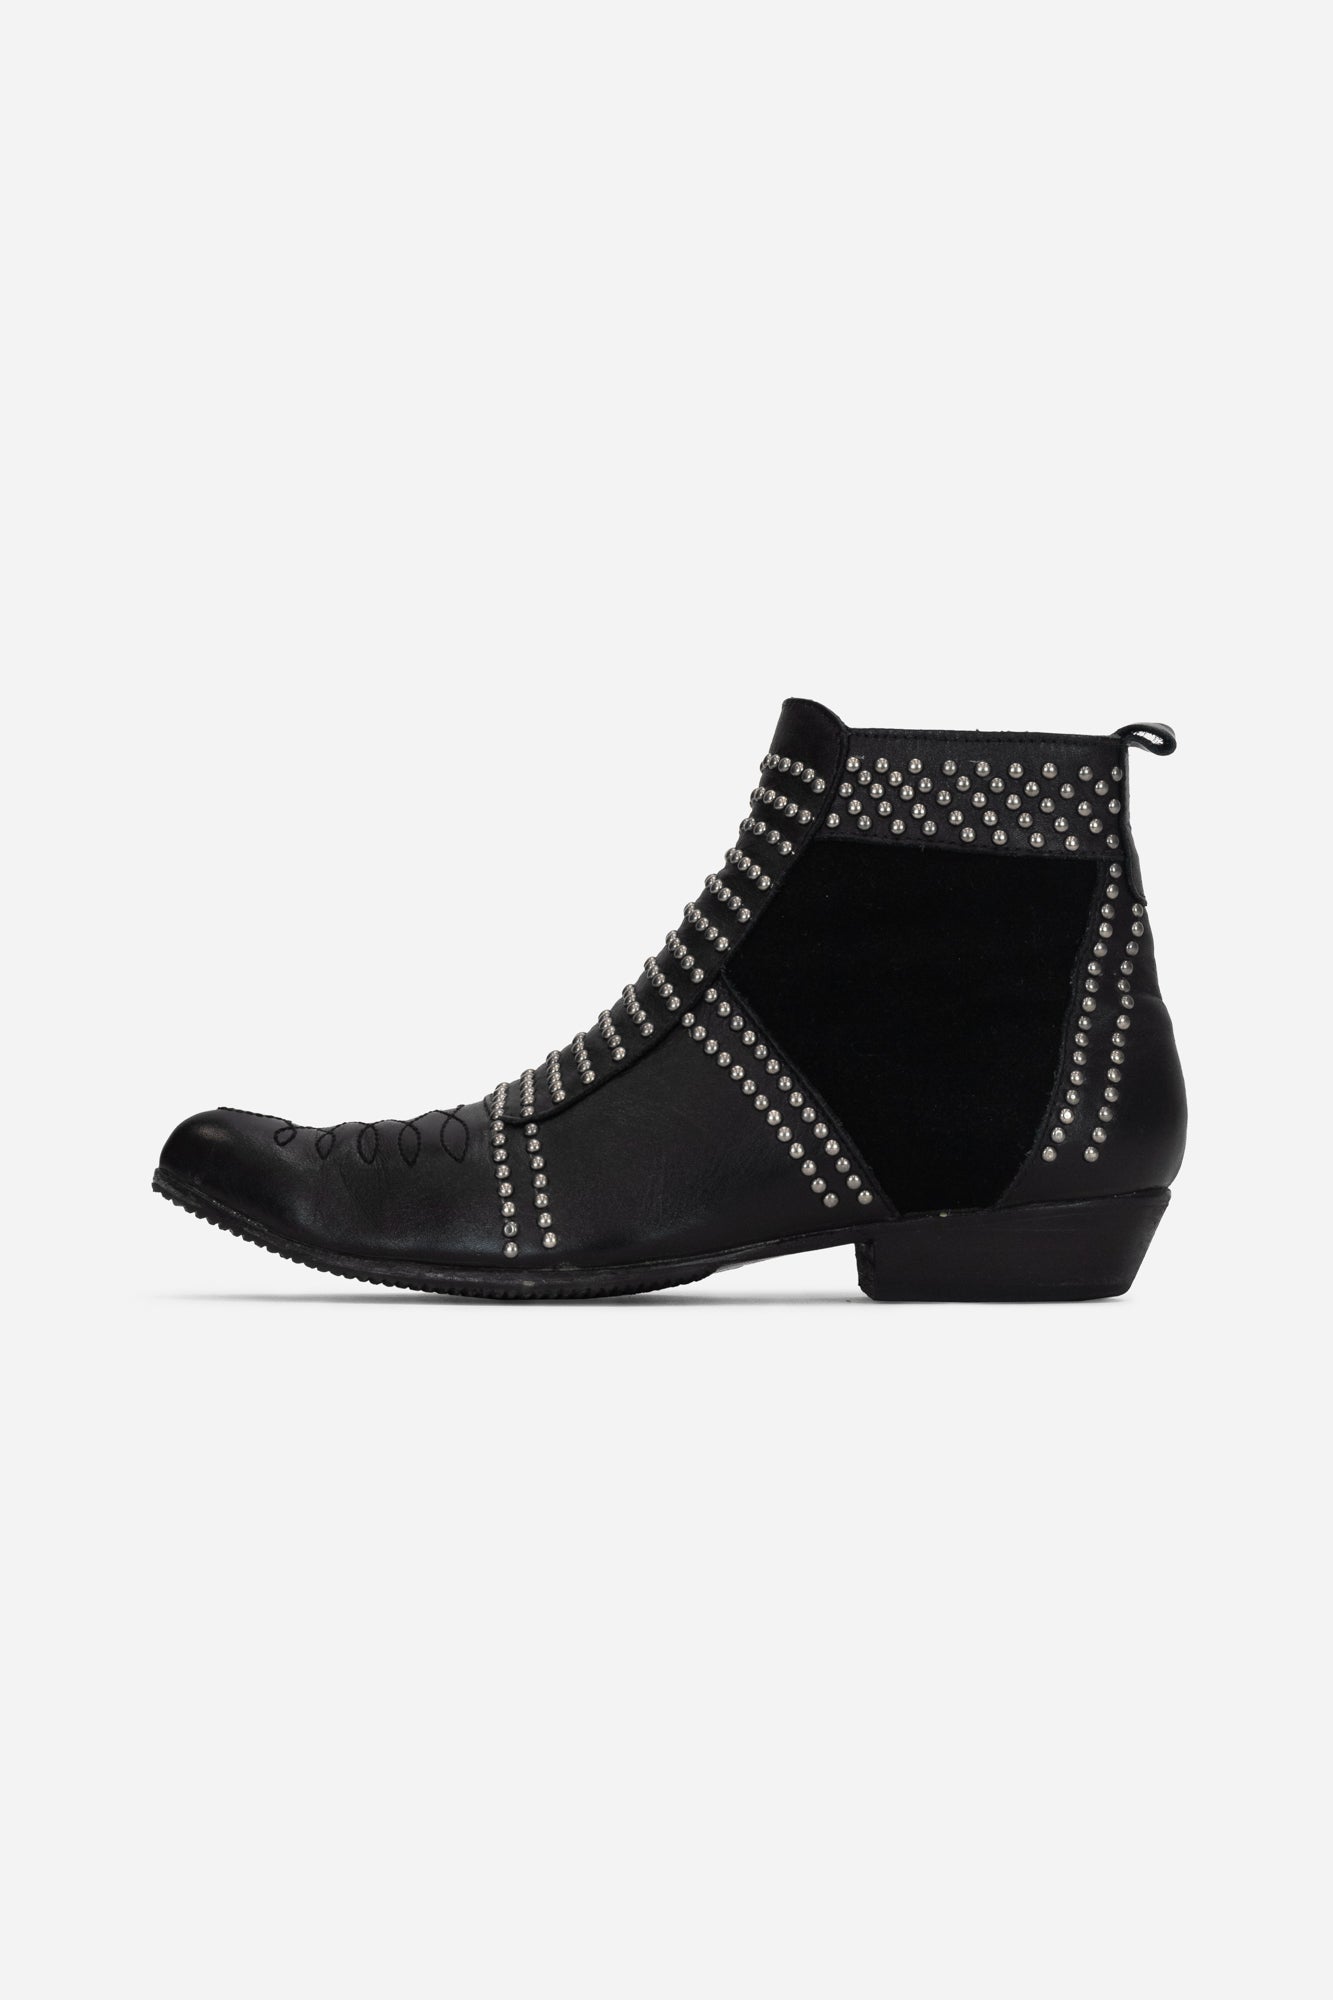 Black Leather Studded Pointed Toe Ankle Boots